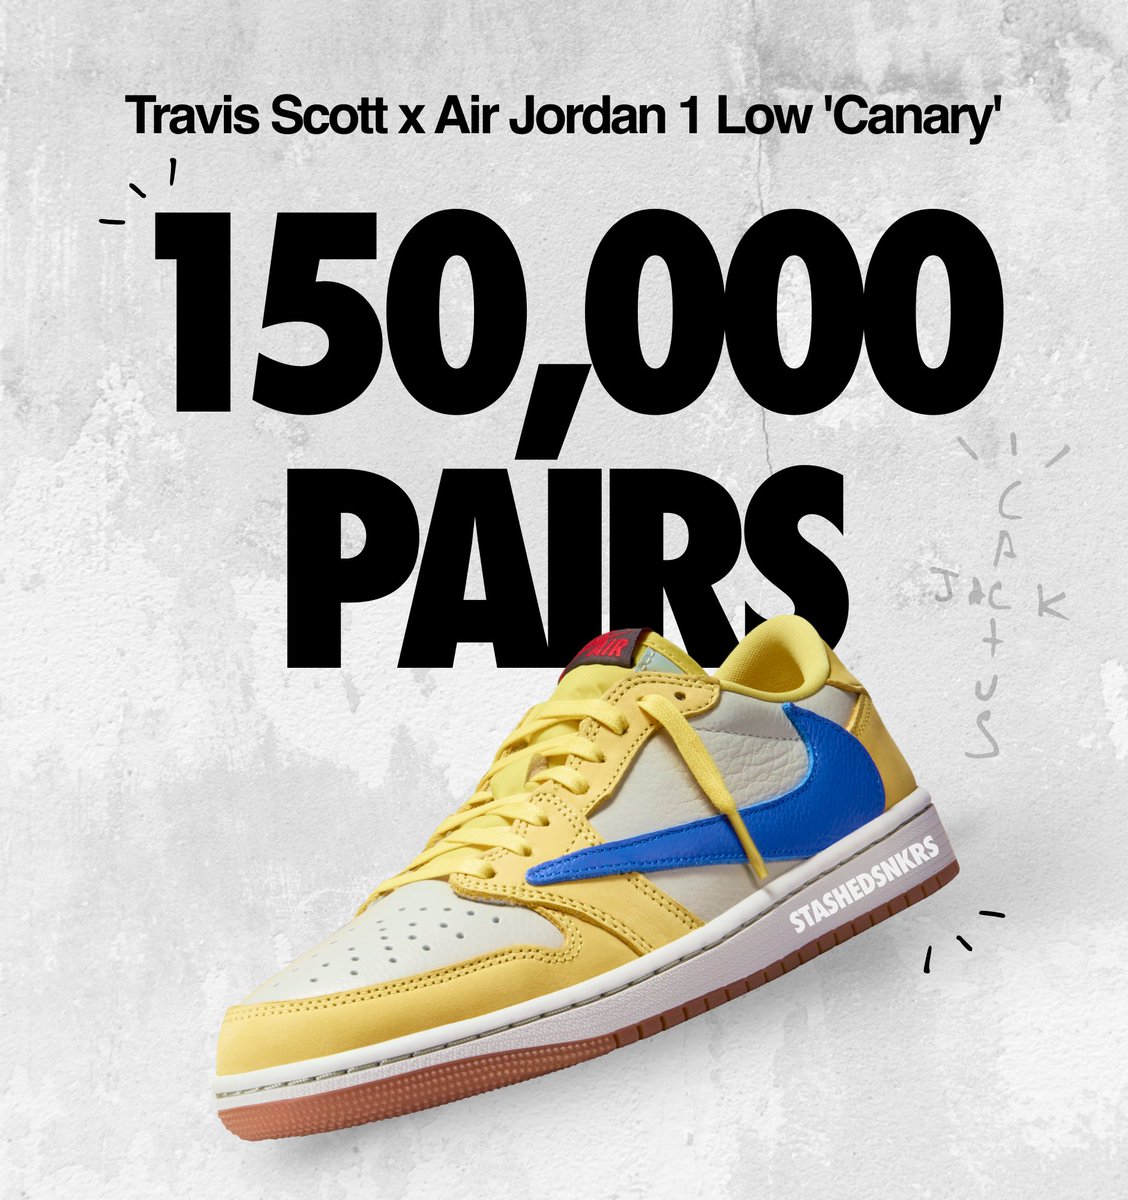 🍋🌵 The Canary Travis x Air Jordan 1 is one of the most produced colorways yet with around 150,000 pairs made We just revealed ALL the info Nike doesn’t want you to know about the EARLY SNKRS DROP and how to actually get these for retail! stashed-sneakers.com/blogs/news-and…